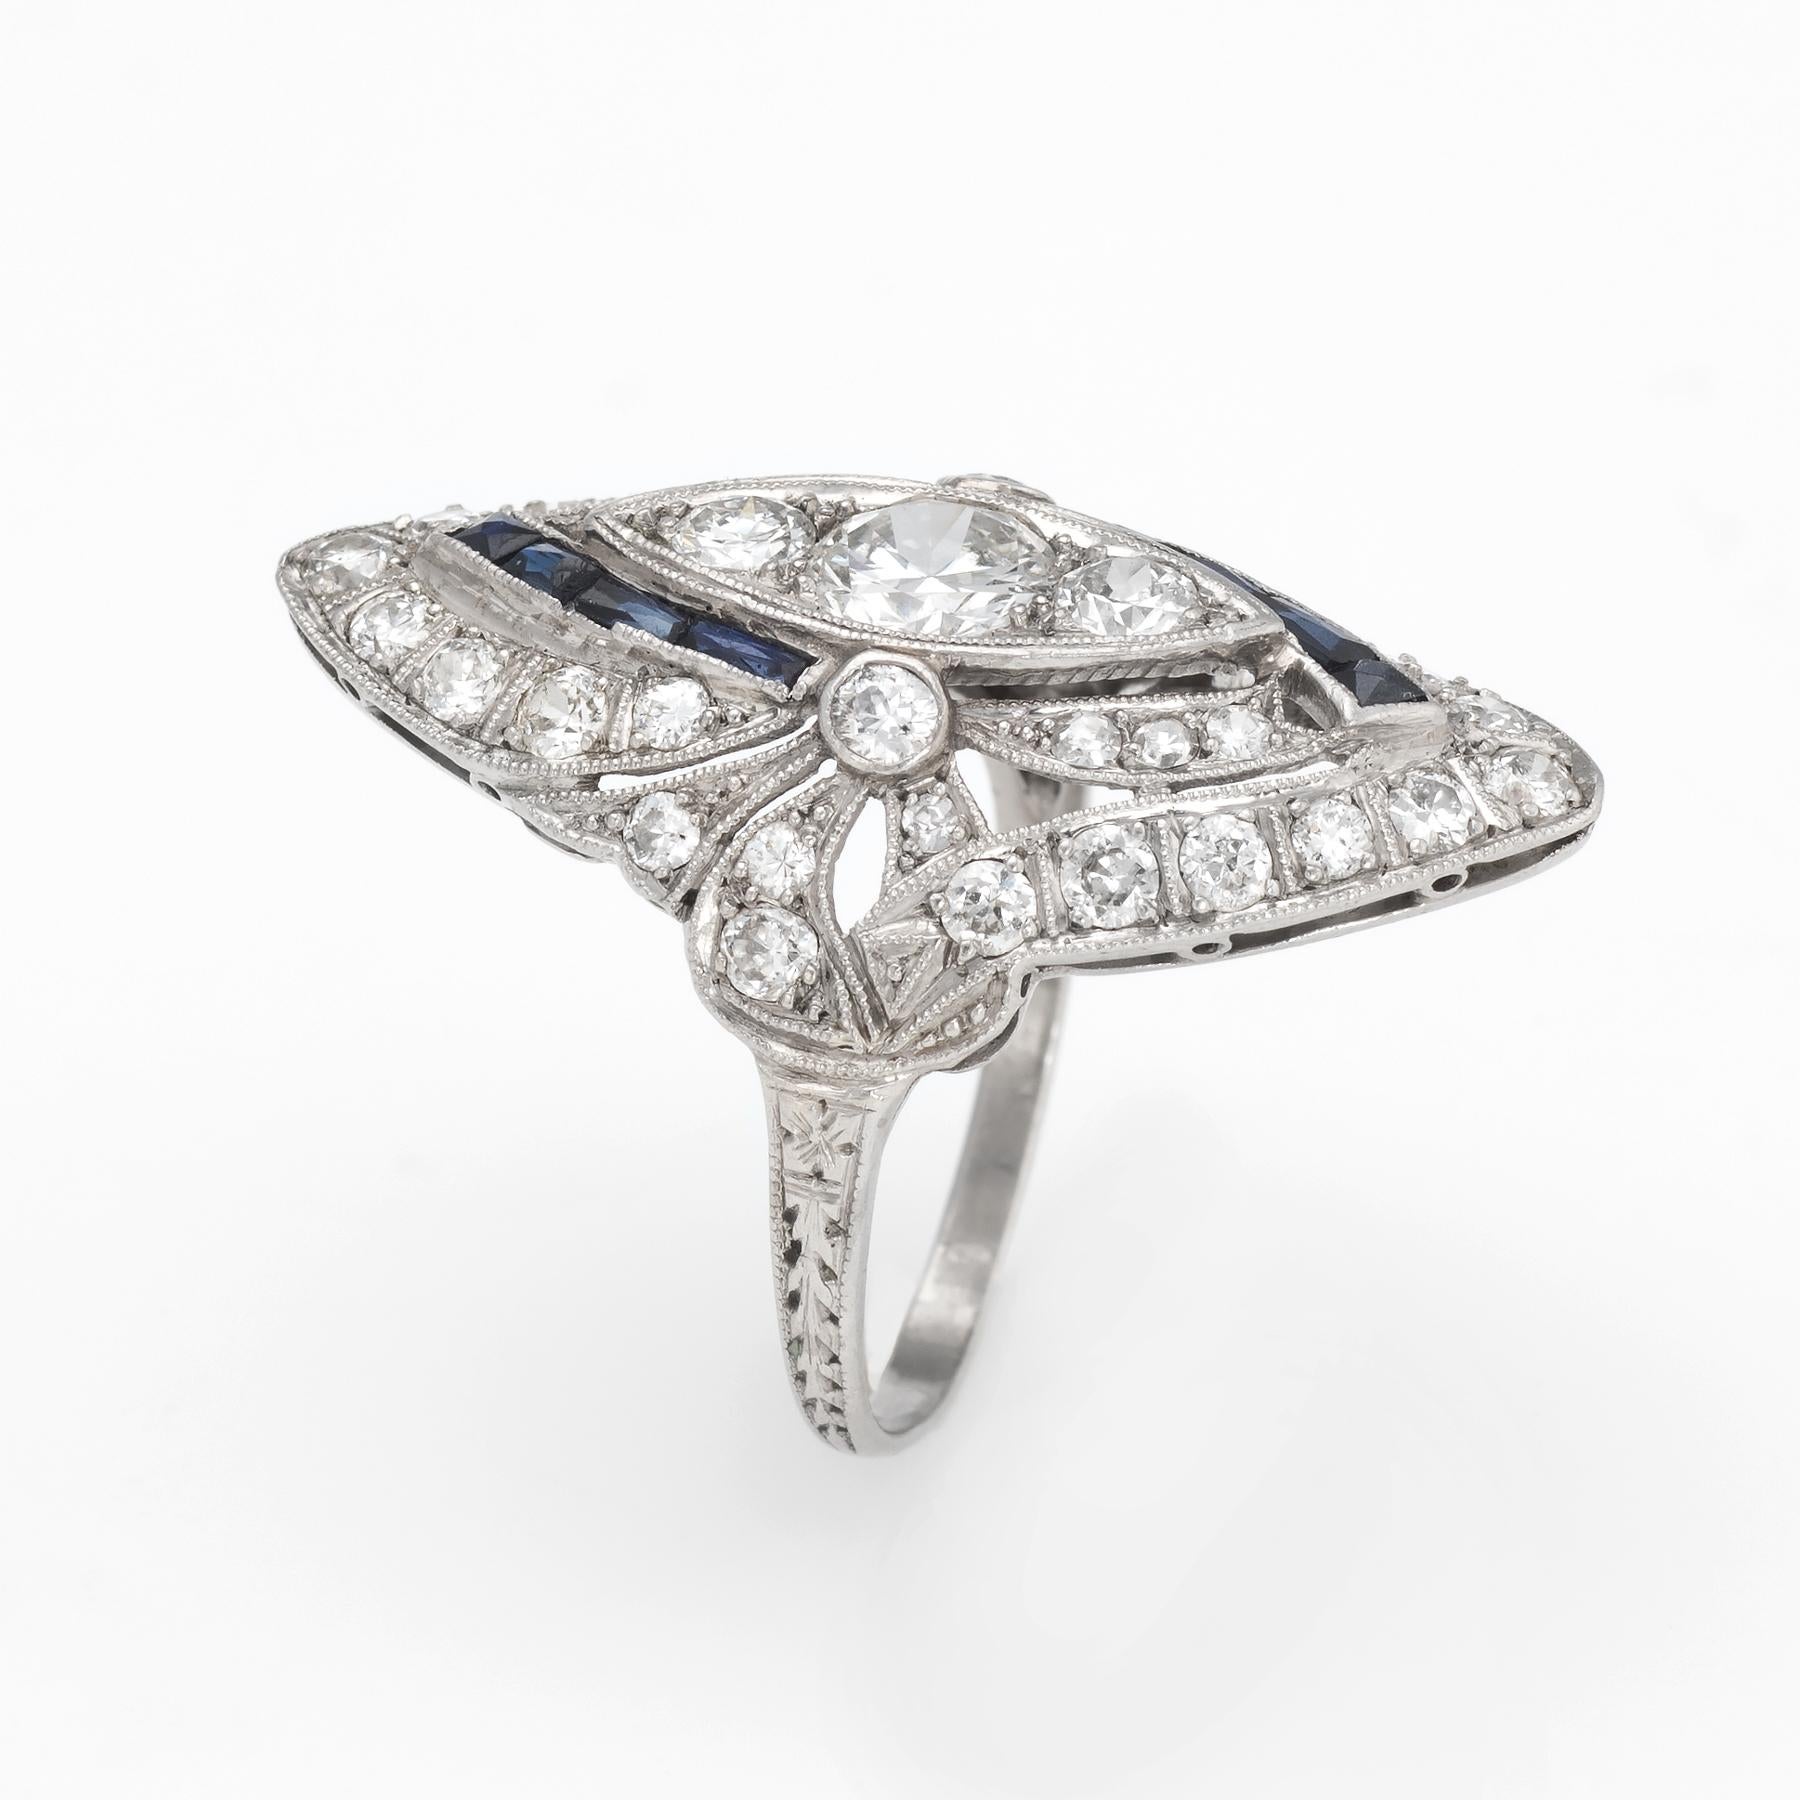 Elegant & finely detailed Art Deco era ring (circa 1920s to 1930s), crafted in 900 platinum. 

Centrally mounted estimated 0.60 carat old European cut diamond is flanked a further 36 diamonds ranging in size from 0.01 to 0.10 carat. The total